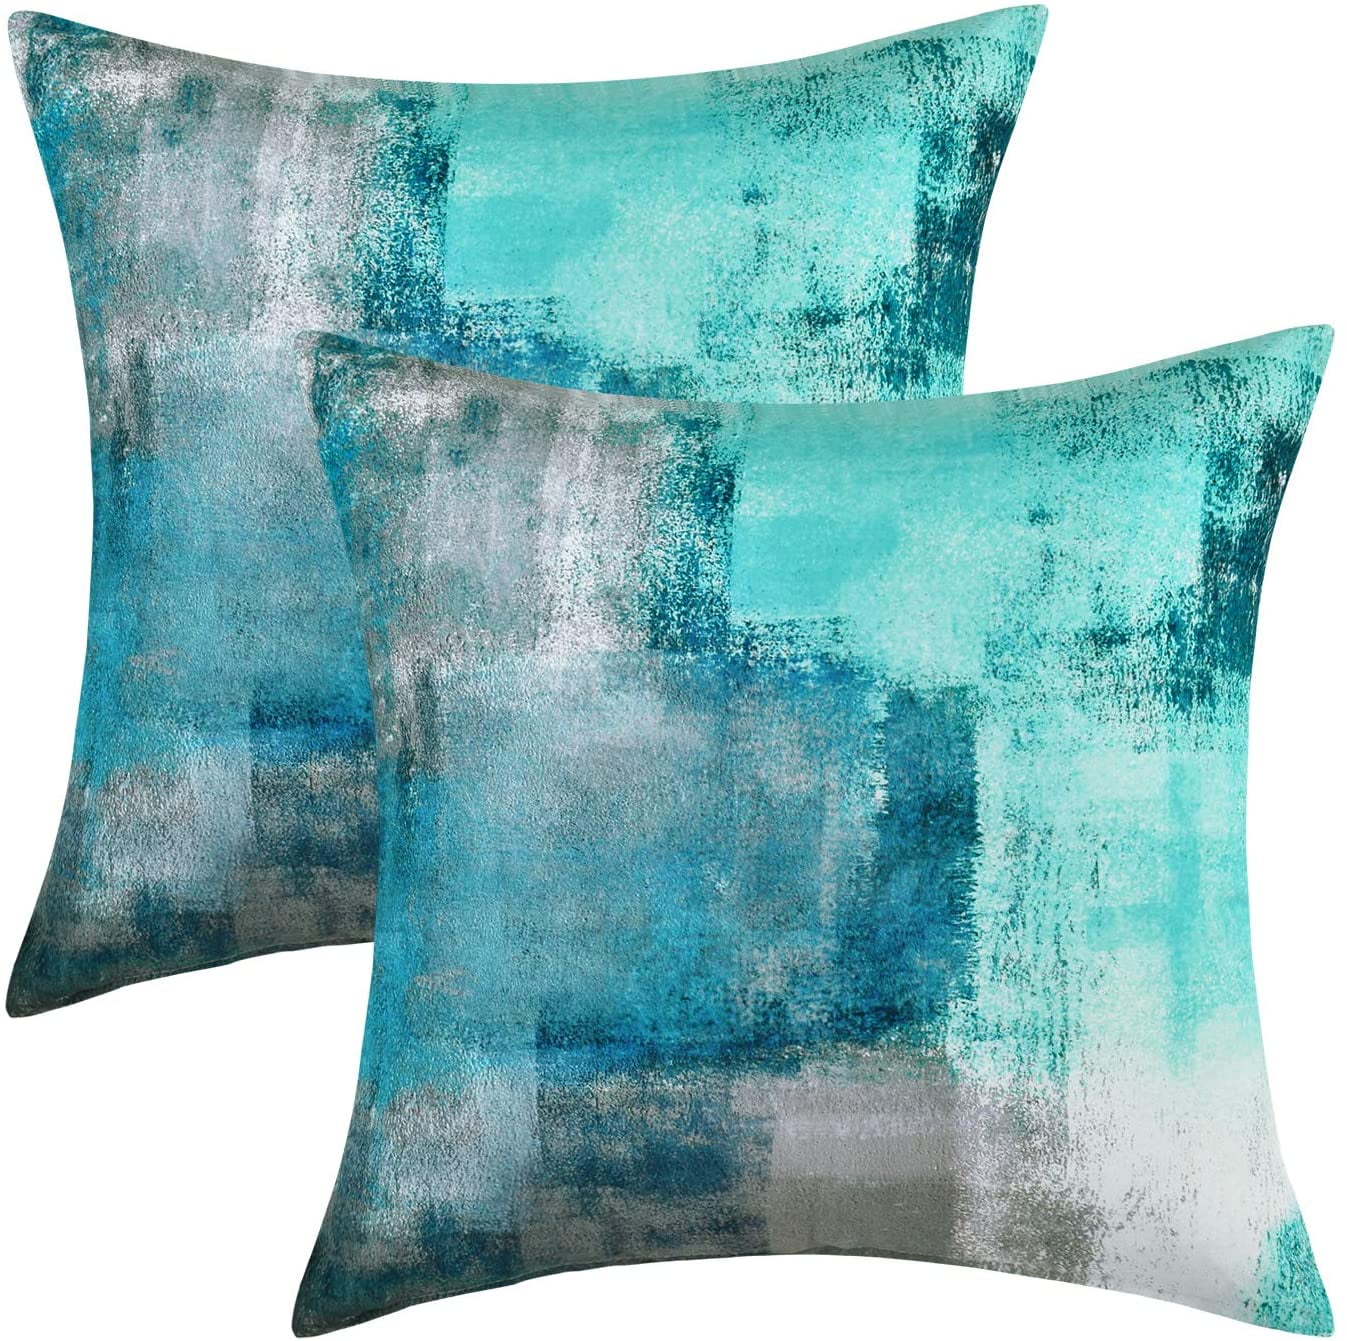 Teal handmade sofa pillow covers accent decorative pillows for sofa 16x16  2pc